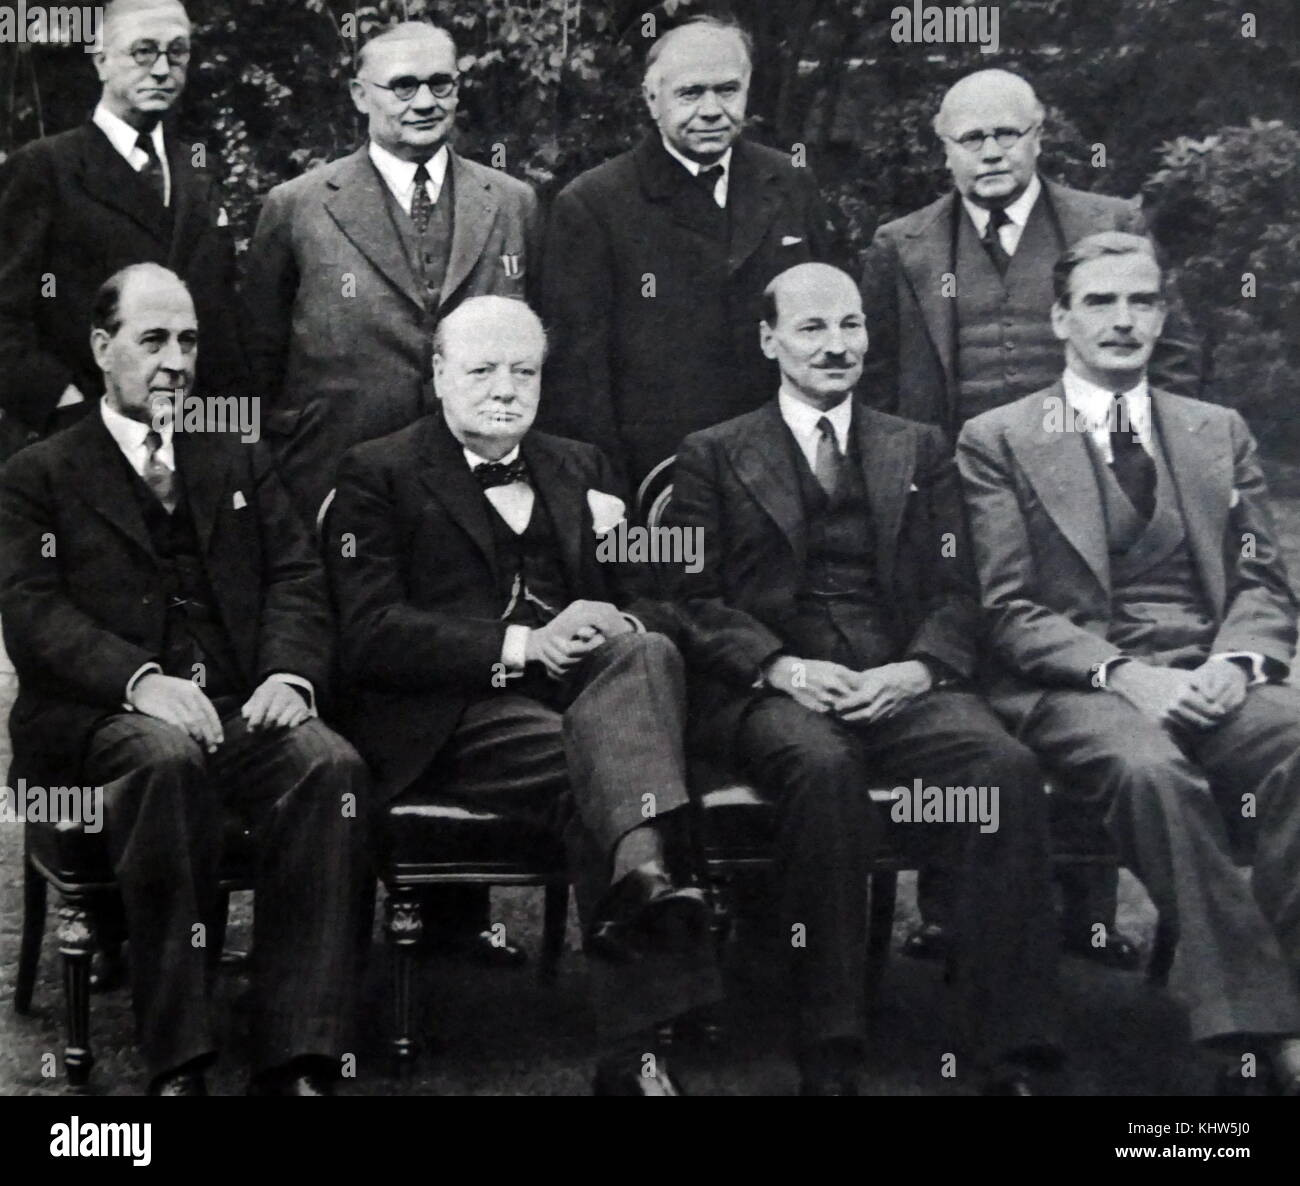 Photograph of Sir Winston Churchill sitting alongside other members of his War Cabinet. (Back row: left to right) Mr Arthur Greenwood (1880-1954) Deputy Leader of the Labour Party; Mr Ernest Bevin (1881-1951) Minister of Labour; Max Aitken, 1st Baron Beaverbrook (1879-1964) Minister of Aircraft Production; Sir Kingsley Wood (1881-1943) Chancellor of the Exchequer. (Front row: left to right) John Anderson, 1st Viscount Waverley (1882-1958) Lord President of the Council; Sir Winston Churchill (1874-1965) Prime Minister of the United Kingdom; Clement Attlee (1883-1967) Lord Privy Seal. Stock Photo